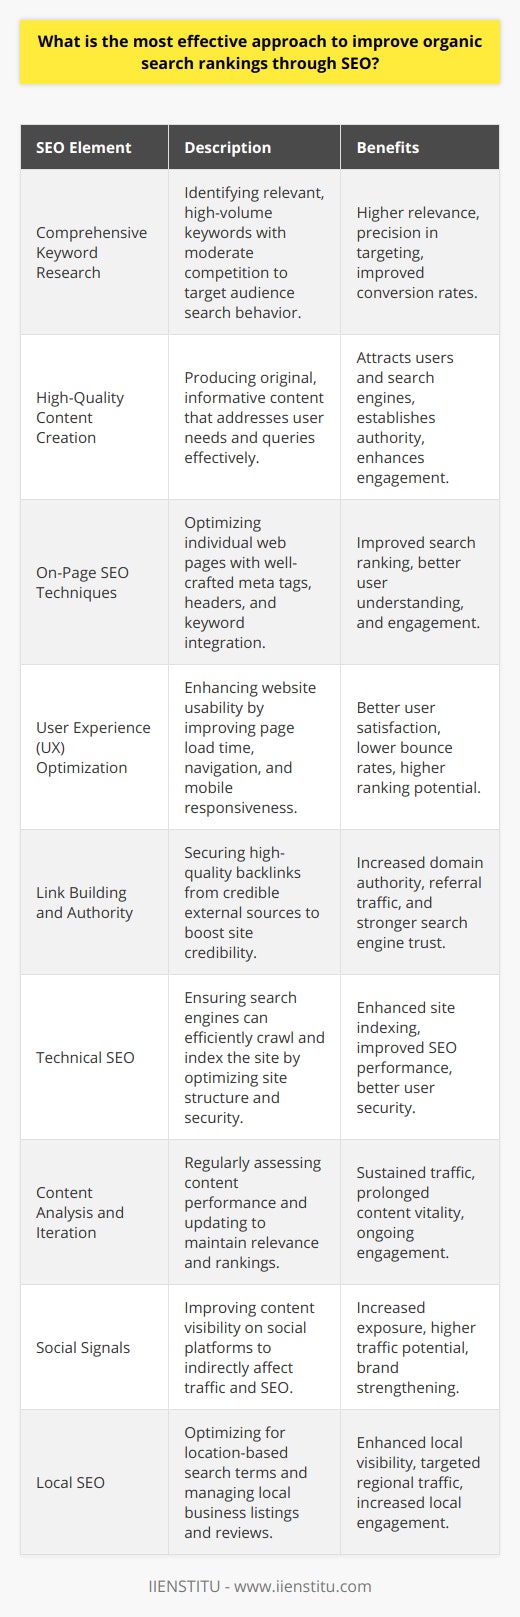 Improving organic search rankings through an effective SEO strategy is integral to online visibility and success. Here are the key elements of a robust approach to enhancing your search engine presence and climbing the SERPs (Search Engine Results Pages):**1. Comprehensive Keyword Research:**Keyword research is the foundational block of every SEO strategy. This process involves identifying and analyzing terms and phrases that users type into search engines. Using tools and platforms such as IIENSTITU, one can discover niche-specific keywords that have a significant search volume yet reasonable competition. Focus on long-tail keywords which can capture more precise search intent and result in higher conversion rates.**2. High-Quality Content Creation:**Content is king in the realm of SEO. Producing original, valuable, and informative content addresses user queries and attracts search engines. To stand apart, focus on creating content that provides unique insights, data, and practical information that users can't find elsewhere. Ensure that your blog posts answer questions comprehensively and provide actionable advice.**3. On-Page SEO Techniques:**On-page SEO refers to the optimization of individual web pages to rank higher in search engines. Ensure that every piece of content has optimized title tags, header tags, a compelling meta description, and a clear structure. Keywords should be naturally integrated into the content, not just to inform search engines about the page's content but also to improve user comprehension.**4. User Experience (UX) Optimization:**A website's user experience significantly affects organic search rankings. Search engine algorithms prioritize sites that load quickly, are easy to navigate, and offer a mobile-friendly experience. Enhance UX by optimizing images, utilizing caching, and implementing a responsive design which adapts to various screen sizes.**5. Link Building and Authority:**Acquiring high-quality backlinks from authoritative websites is a testament to your site's credibility. Create content that is shareable and link-worthy. Guest posting, collaborations, and featuring expert opinions can elevate the perceived value of your content and encourage other sites to link back to it.**6. Technical SEO:**Underneath the website's content lies the critical aspect of technical SEO, which ensures that search engines can efficiently crawl and index your site. This includes enhancing site architecture, creating a sitemap, utilizing schema markup, and ensuring you have a secure HTTPS connection.**7. Content Analysis and Iteration:**SEO is an ongoing process. Continually analyzing performance metrics can reveal which content resonates with your audience and what can be improved. Regularly updating older blog posts with new information and keywords can reinvigorate stale content and maintain your rankings.**8. Social Signals:**While not a direct ranking factor, social signals such as shares, likes, and visibility on platforms like Facebook, Twitter, or LinkedIn, can indirectly improve search rankings by increasing traffic to your content.**9. Local SEO:**For businesses with a physical location or regional service, local SEO is vital. This involves optimizing for local keywords, creating a Google My Business account, and managing online reviews to improve visibility in local search results.Implementing a comprehensive SEO strategy is a marathon, not a sprint. By placing equal emphasis on keyword research, quality content, on-page optimization, UX, link building, technical SEO, iterative content analysis, social signals, and local SEO, you can build a solid foundation that will incrementally improve organic search rankings. Patience, perseverance, and a commitment to quality will pave the way towards SEO success.